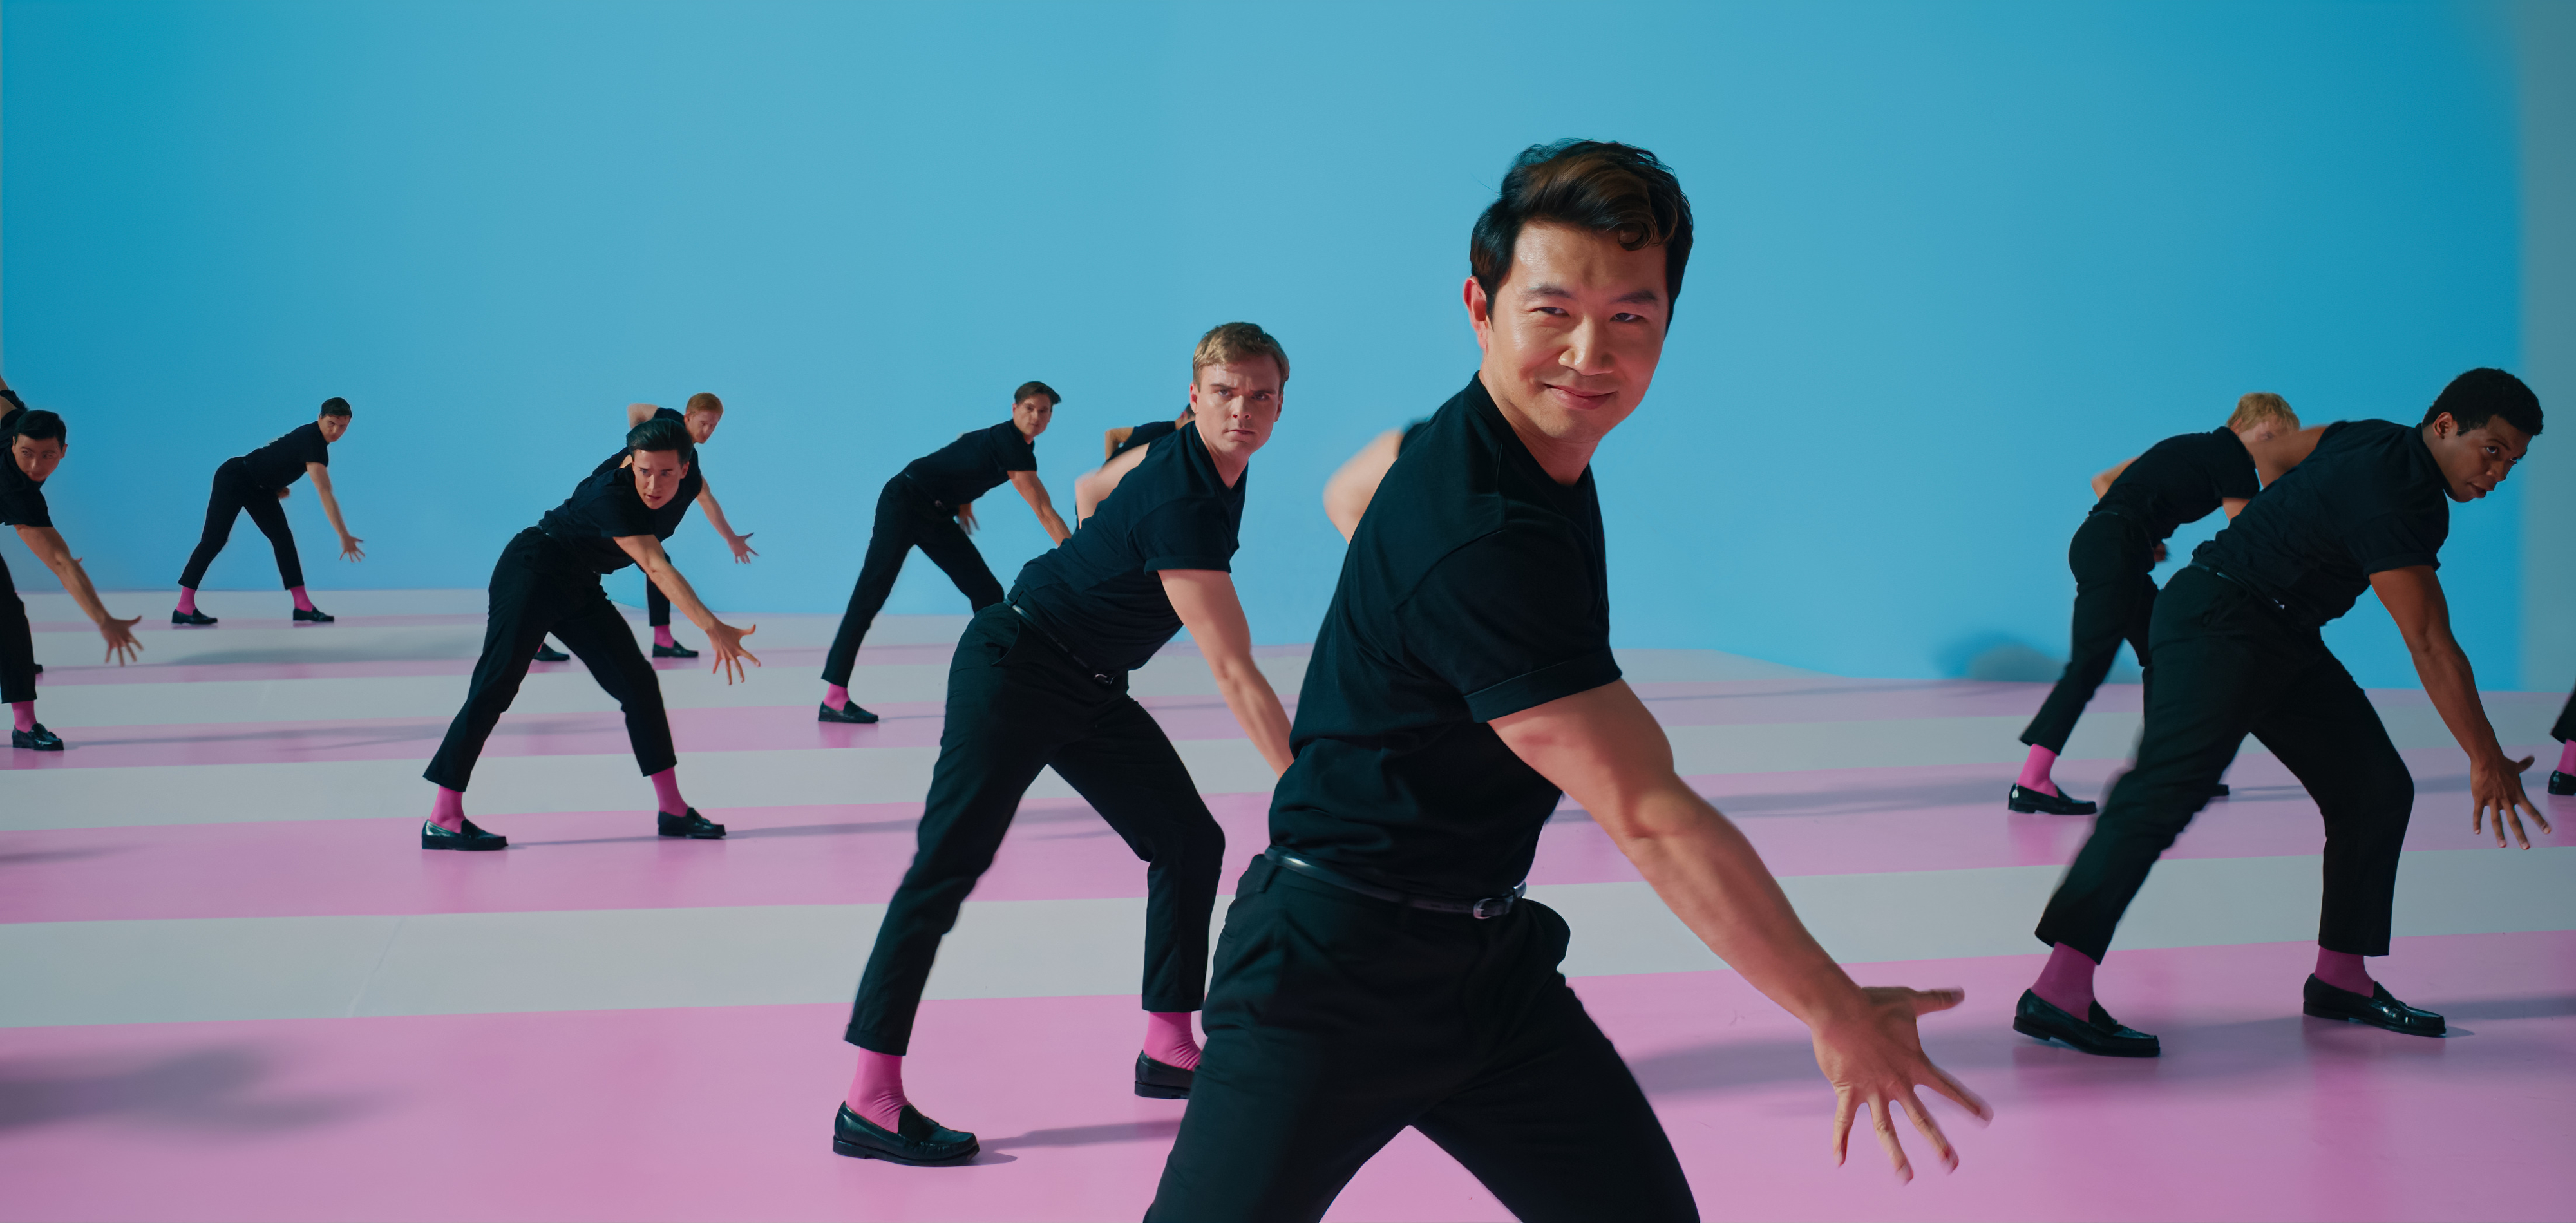 A choreographed dance with Simu Liu as Ken in the front